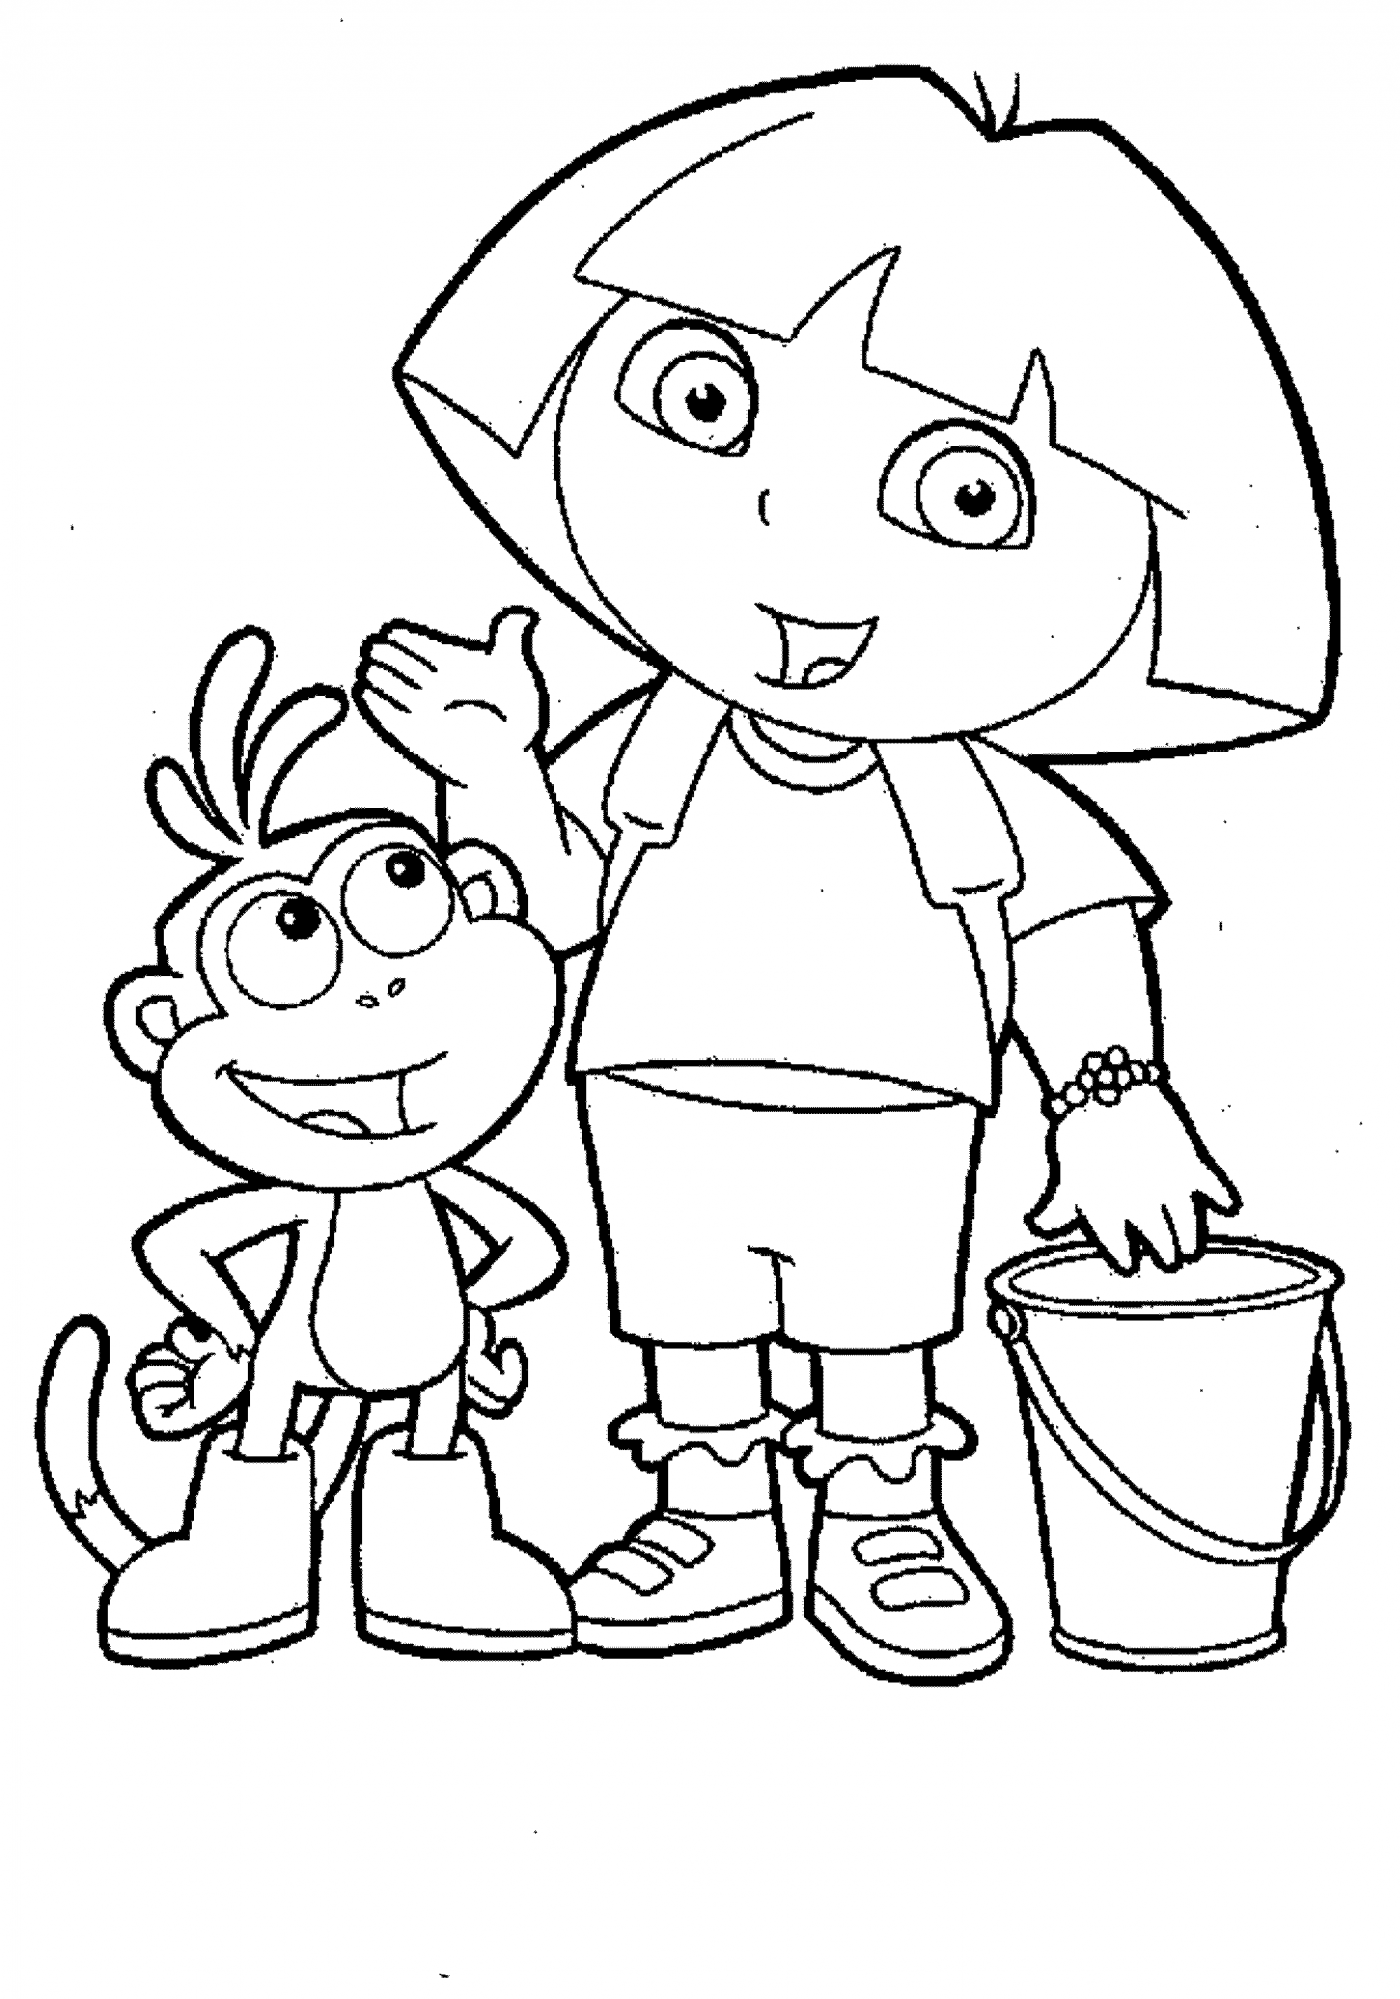 Print & Download - Dora Coloring Pages to Learn New Things